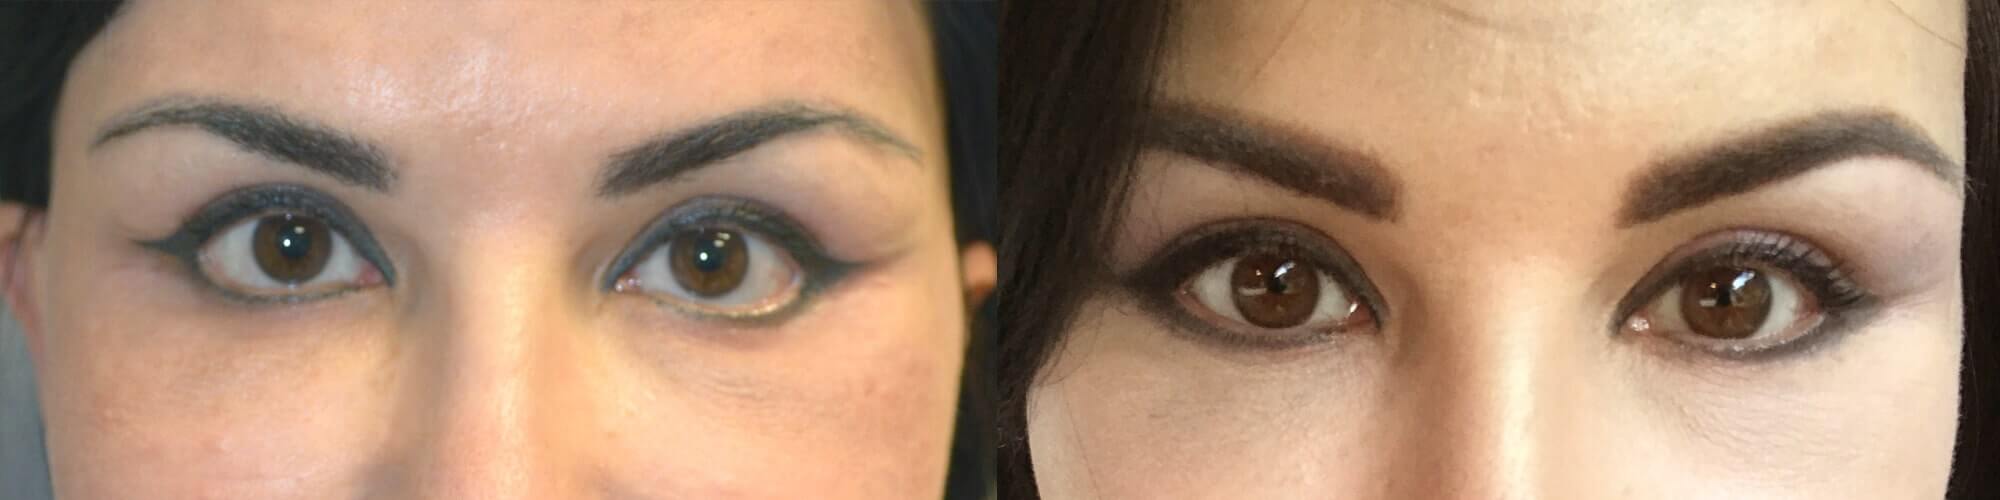 47 year old Russian female, with post-blepharoplasty lower eyelid retraction and sclera show and rounded eyes, underwent revision eyelid surgery with lower eyelid retraction surgery (internal eyelid lift, alloderm spacer graft, canthoplasty) to restore almond eye shape. Before and 3 months after lower eyelid retraction repair photos are shown.